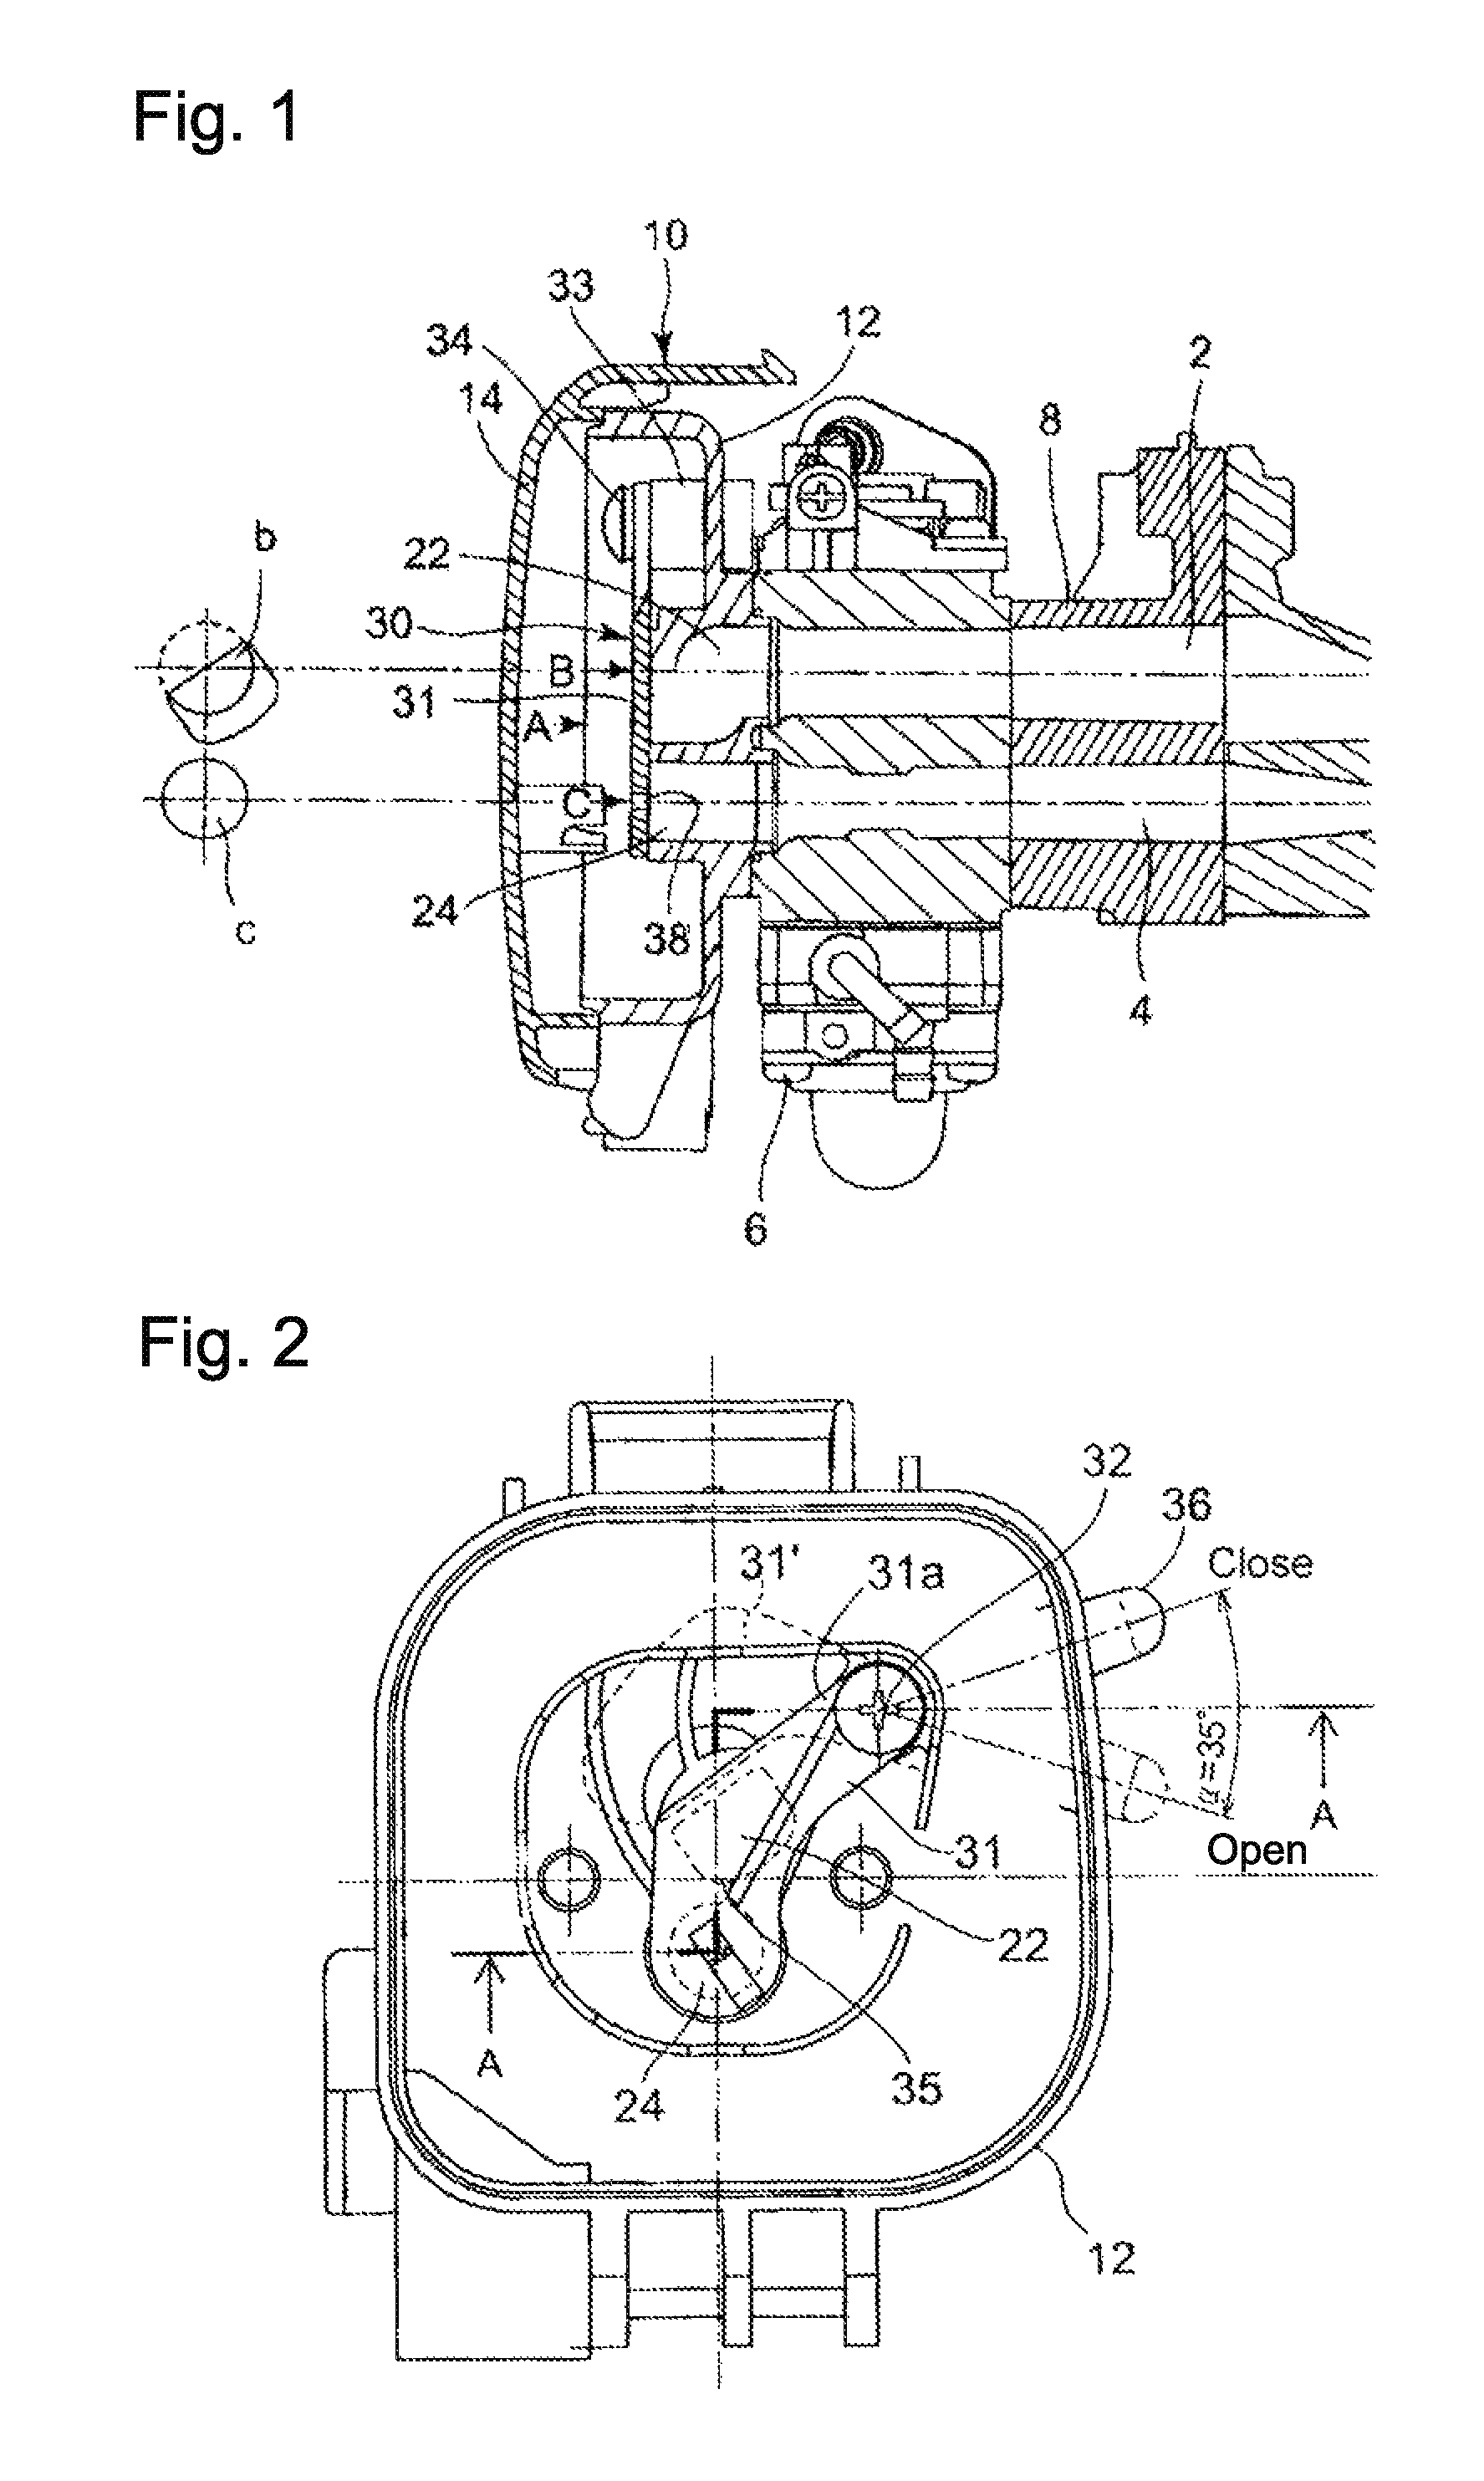 Air cleaner in two-stroke engine